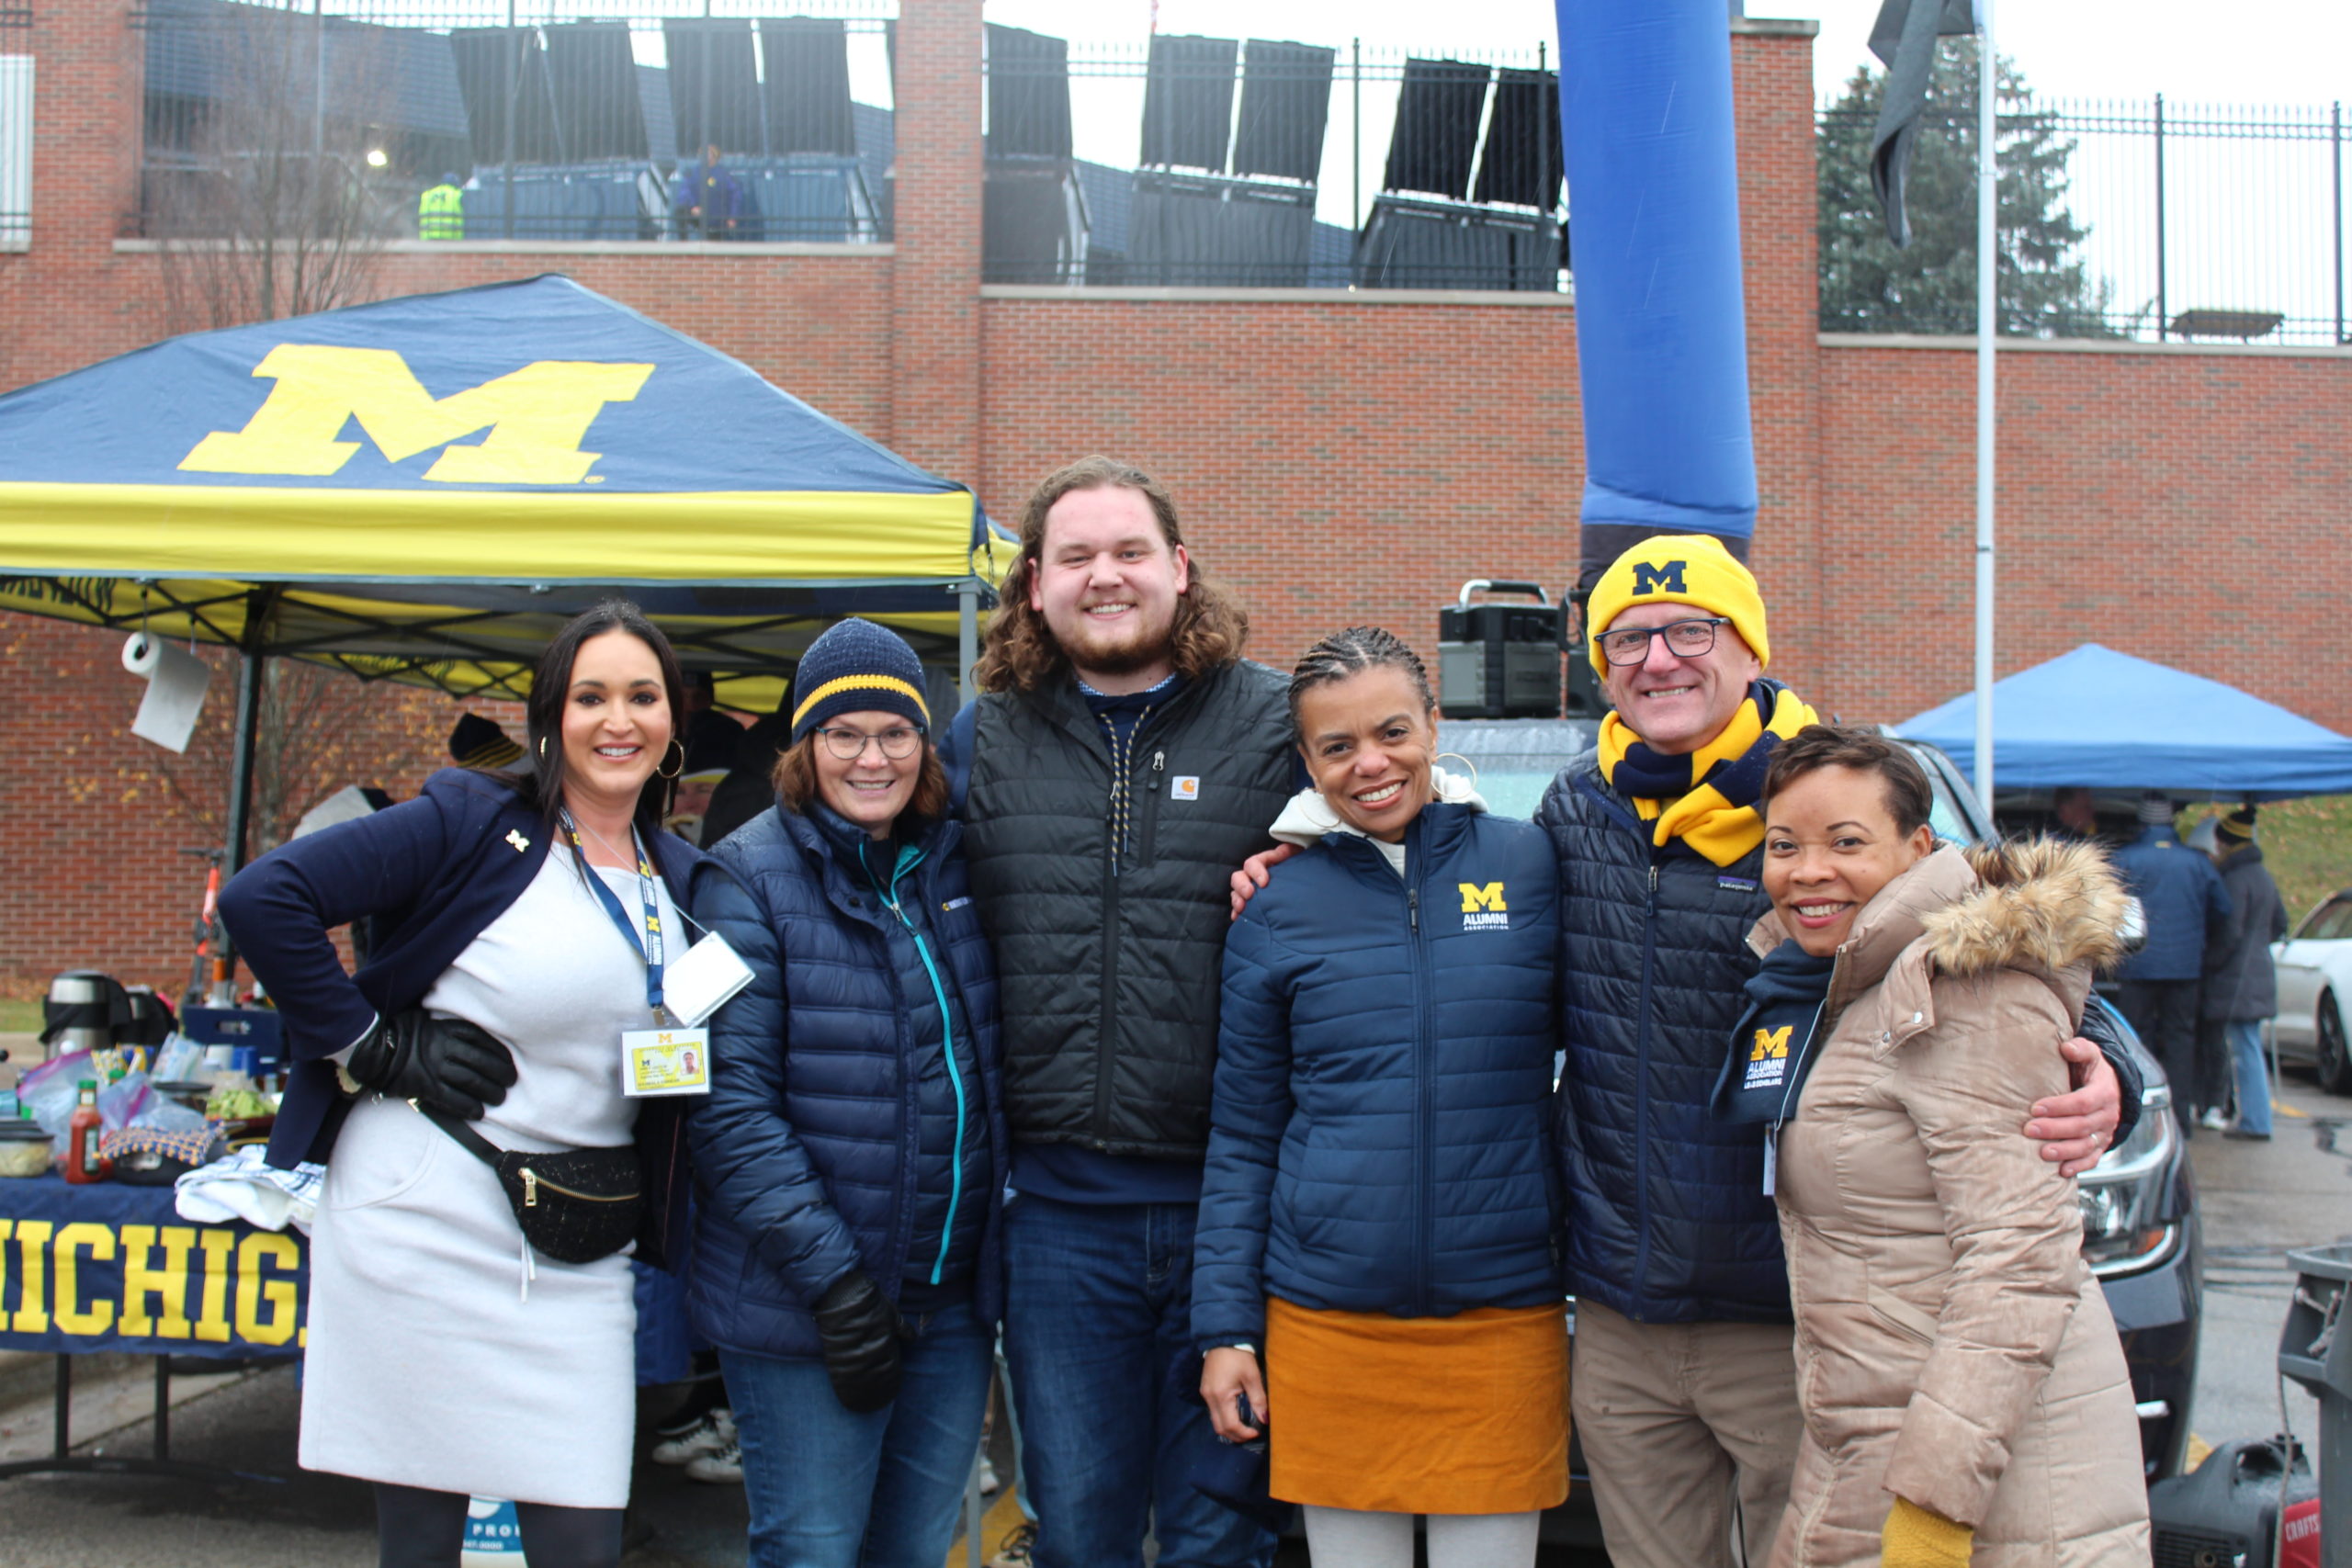 Corie Pauling poses at a Big House tailgate with Wendell Brooks, his family, and two members of the Alumni Association staff.